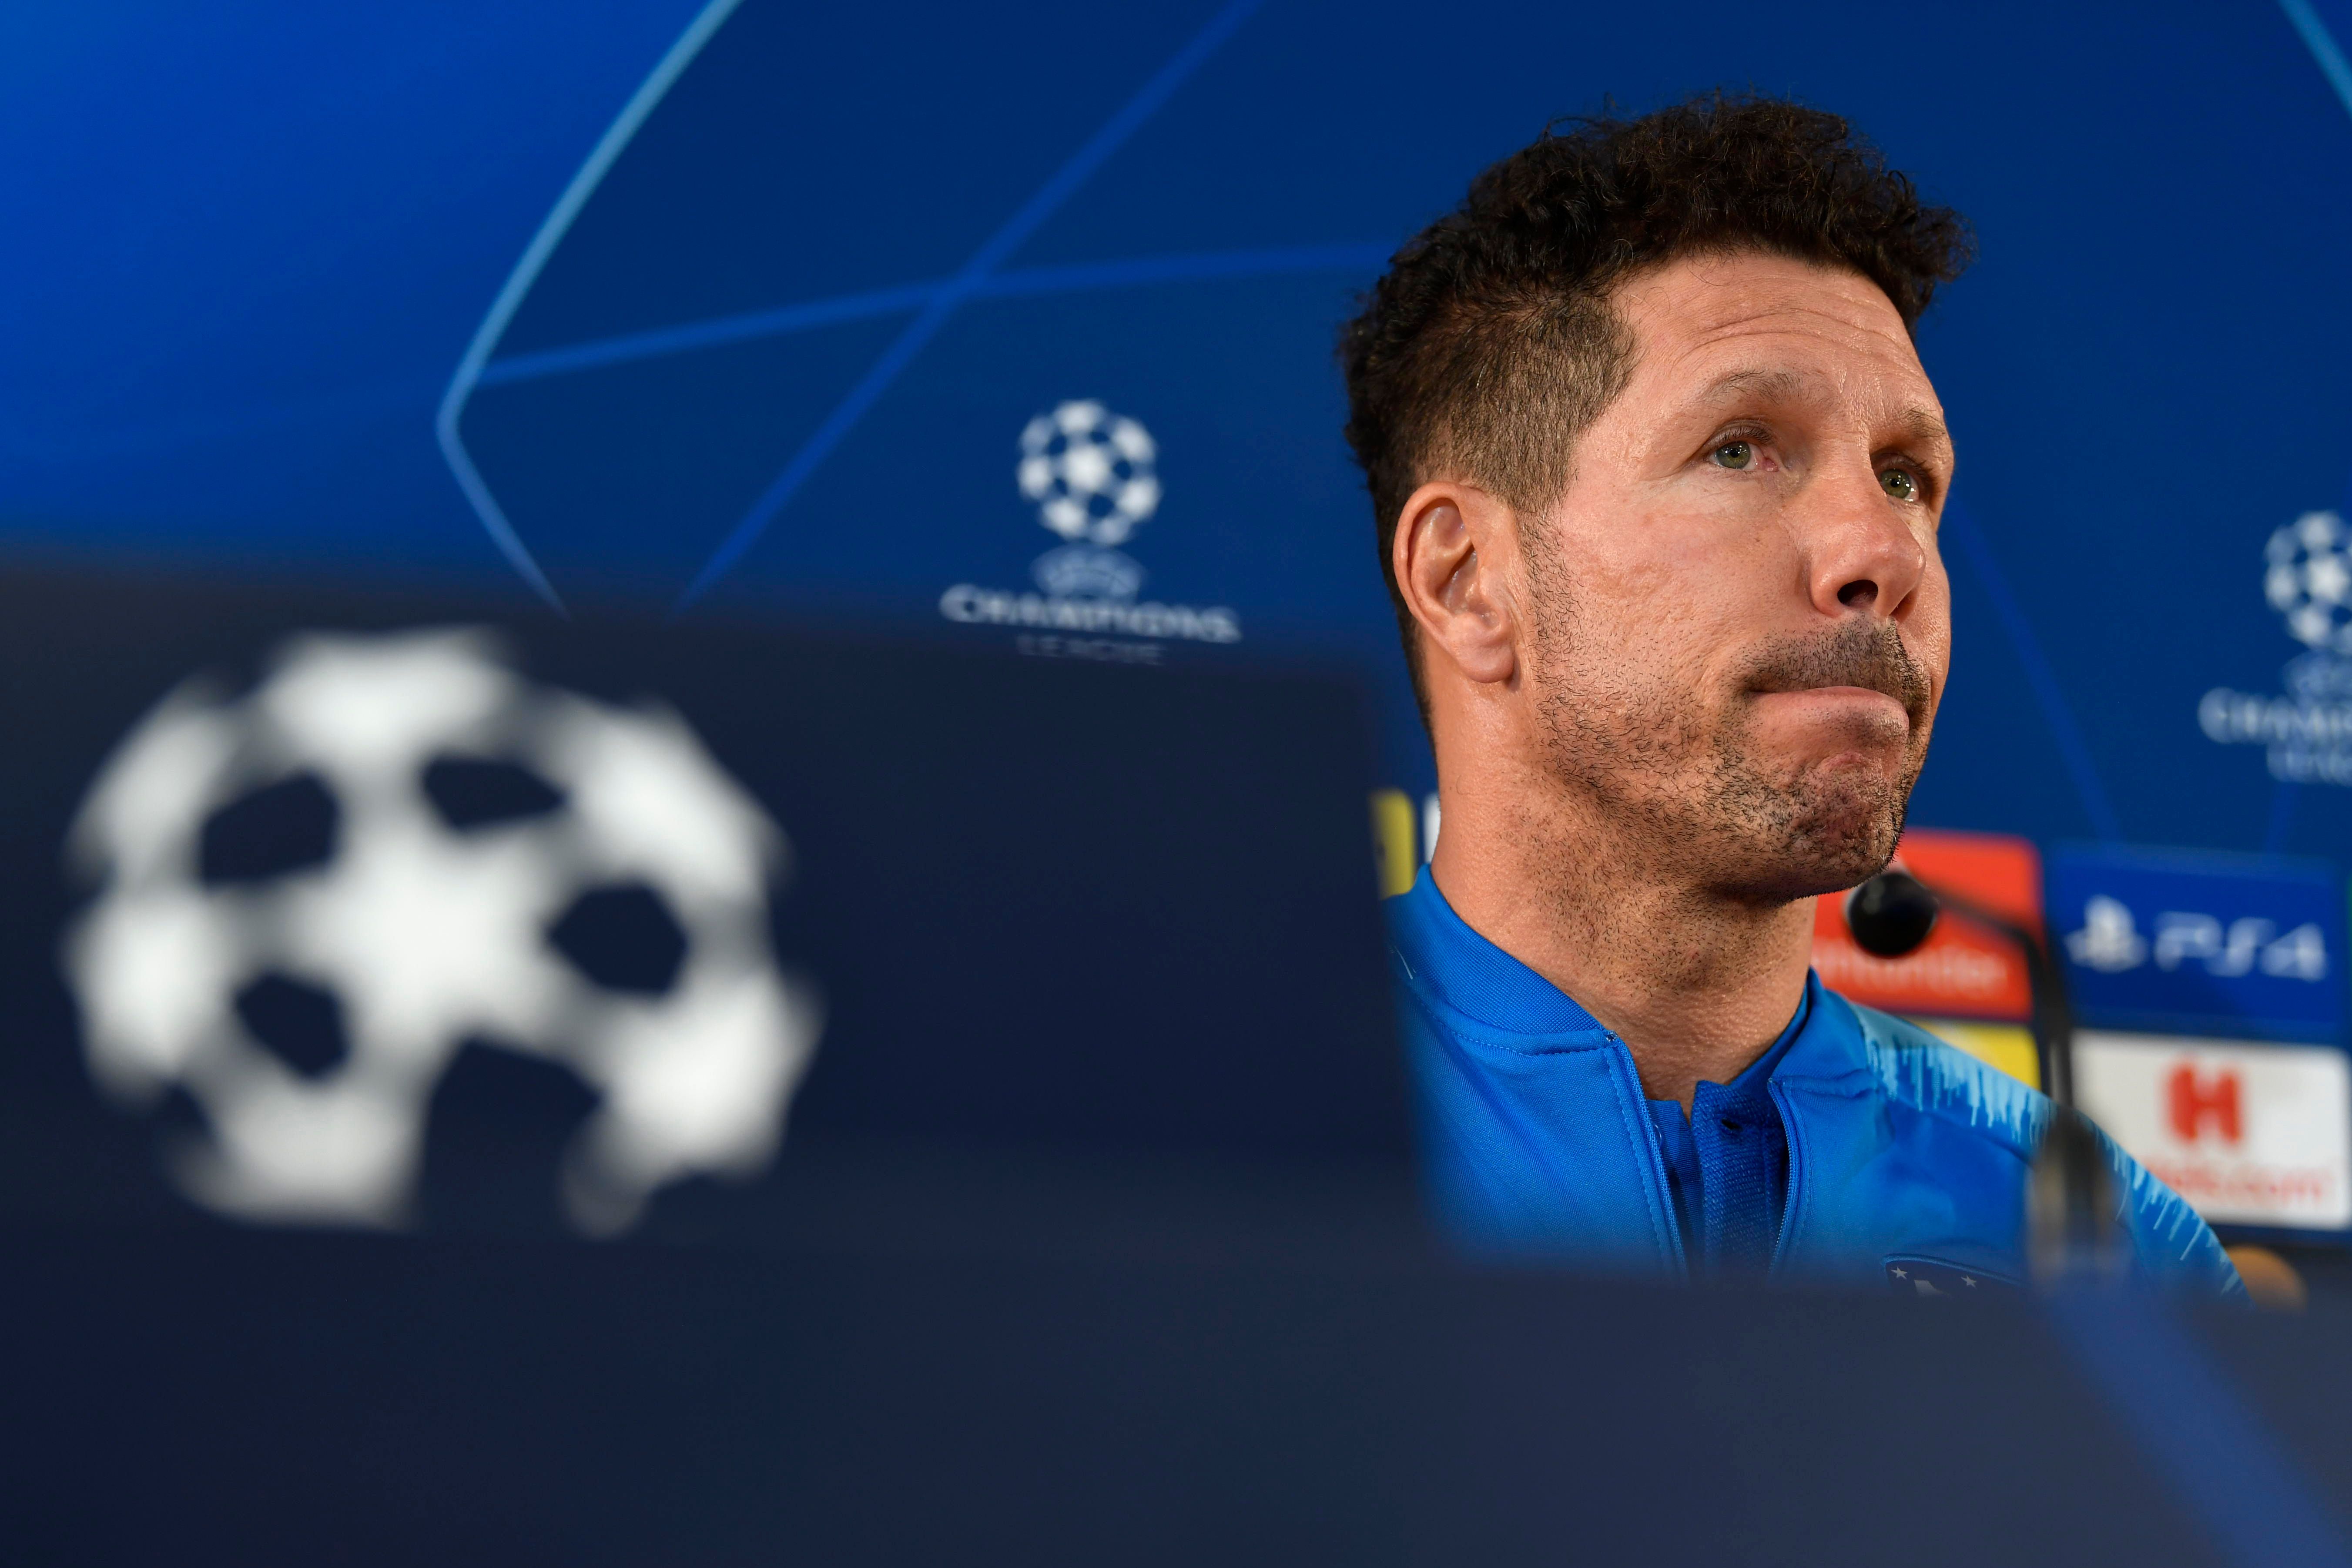 Atletico Madrid's Argentinian coach Diego Simeone looks on during a press conference at the Louis II stadium in Monaco on September 17, 2018, on the eve of the UEFA Champions League football match between Monaco and Atletico Madrid. (Photo by CHRISTOPHE SIMON / AFP)        (Photo credit should read CHRISTOPHE SIMON/AFP/Getty Images)